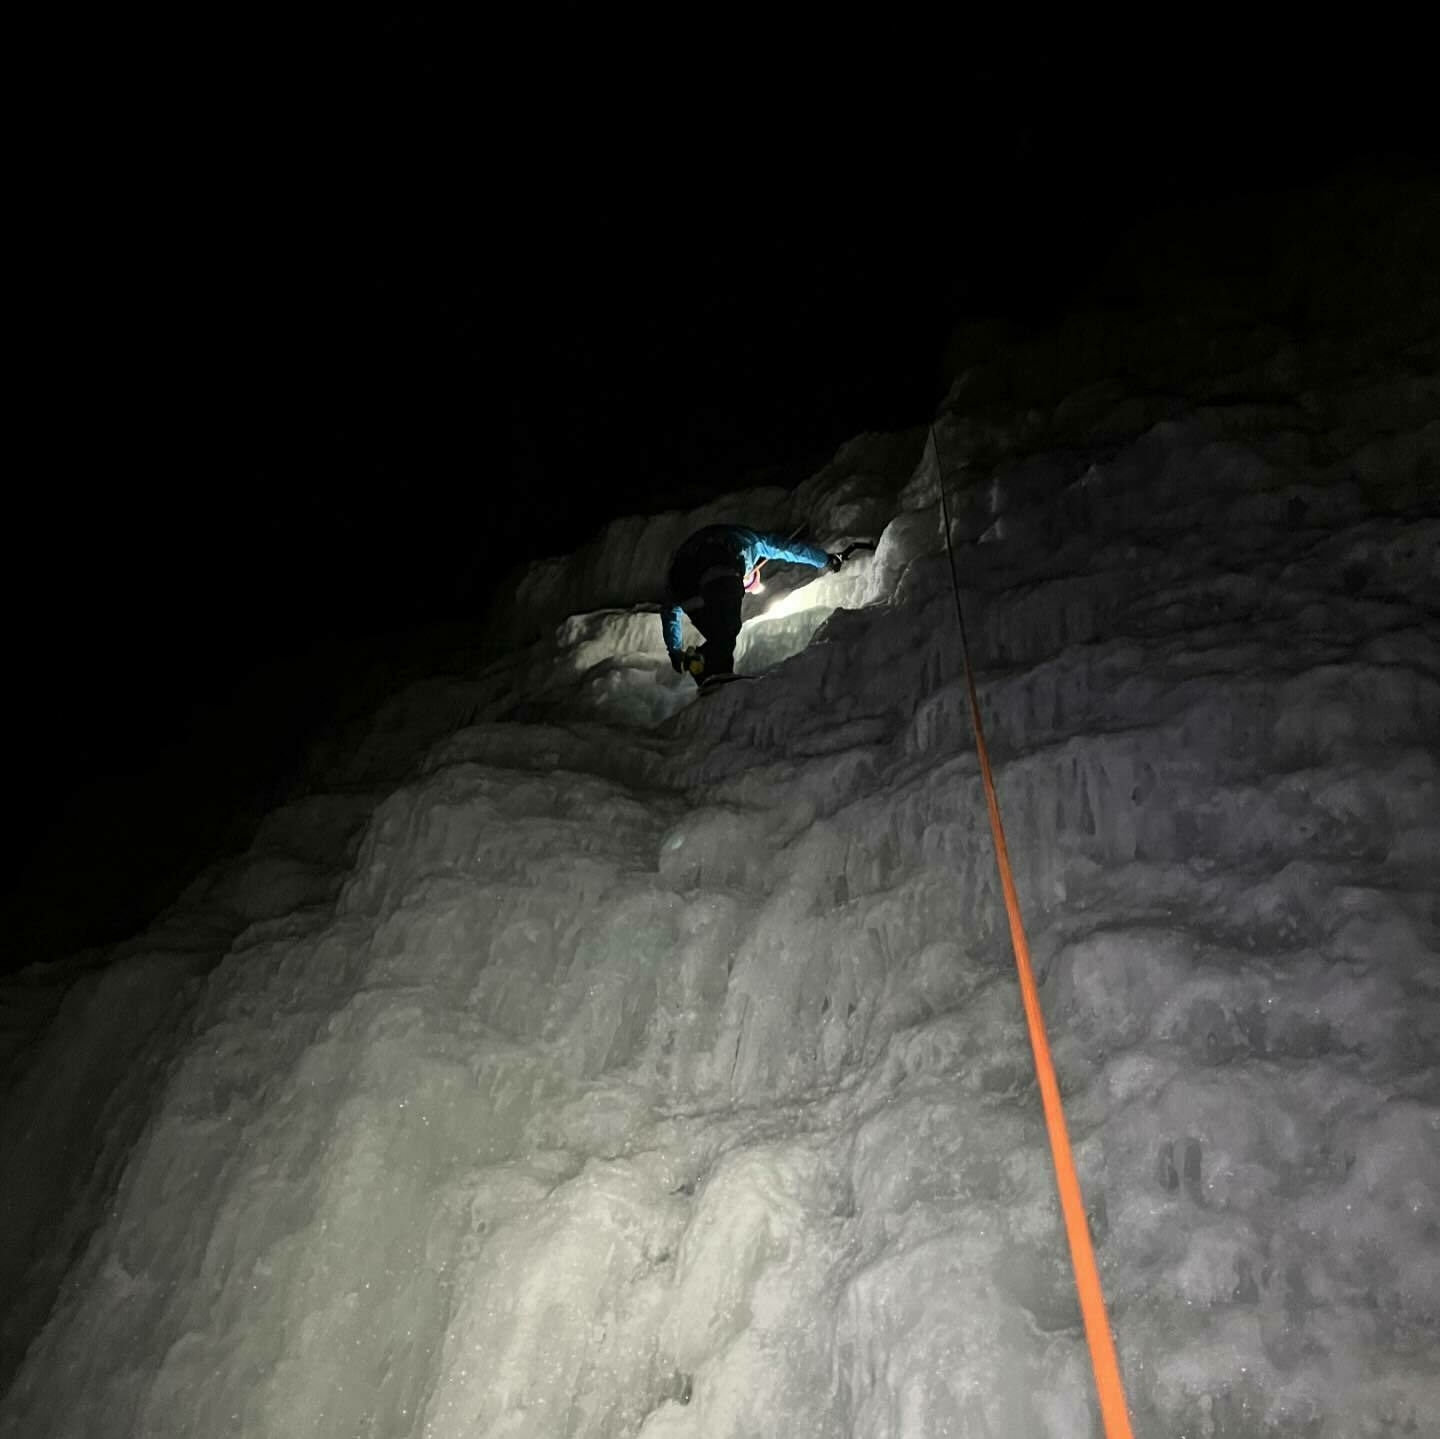 A person is ice climbing at night, illuminated by a headlamp, with an orange rope extending downward in a dark environment.